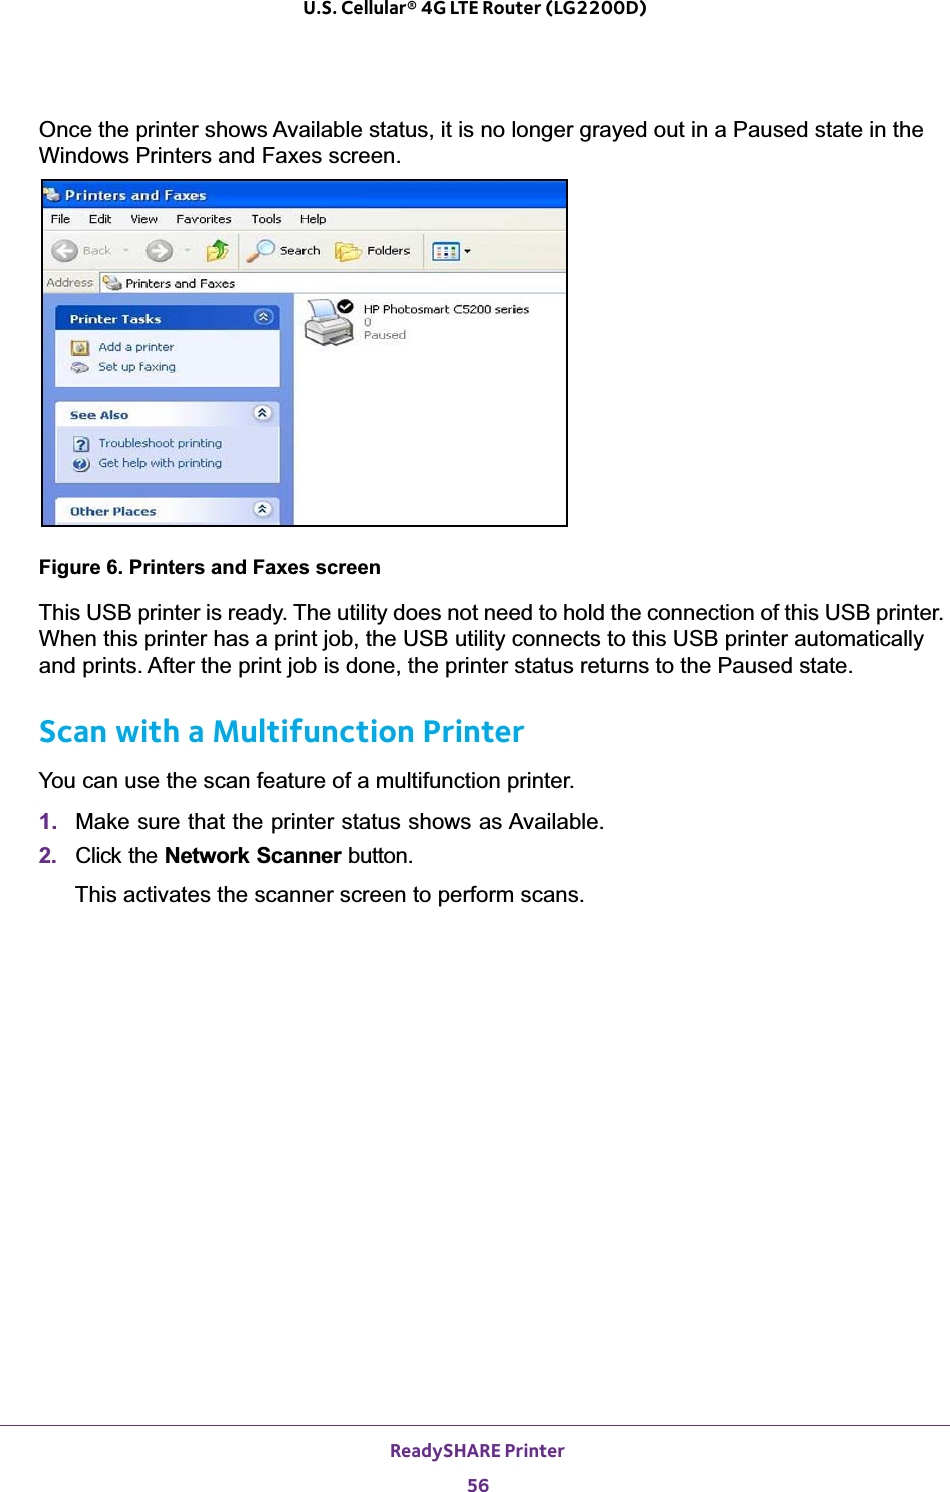 ReadySHARE Printer56U.S. Cellular® 4G LTE Router (LG2200D) Once the printer shows Available status, it is no longer grayed out in a Paused state in the Windows Printers and Faxes screen.Figure 6. Printers and Faxes screenThis USB printer is ready. The utility does not need to hold the connection of this USB printer. When this printer has a print job, the USB utility connects to this USB printer automatically and prints. After the print job is done, the printer status returns to the Paused state.Scan with a Multifunction PrinterYou can use the scan feature of a multifunction printer. 1. Make sure that the printer status shows as Available.2. Click the Network Scanner button. This activates the scanner screen to perform scans.